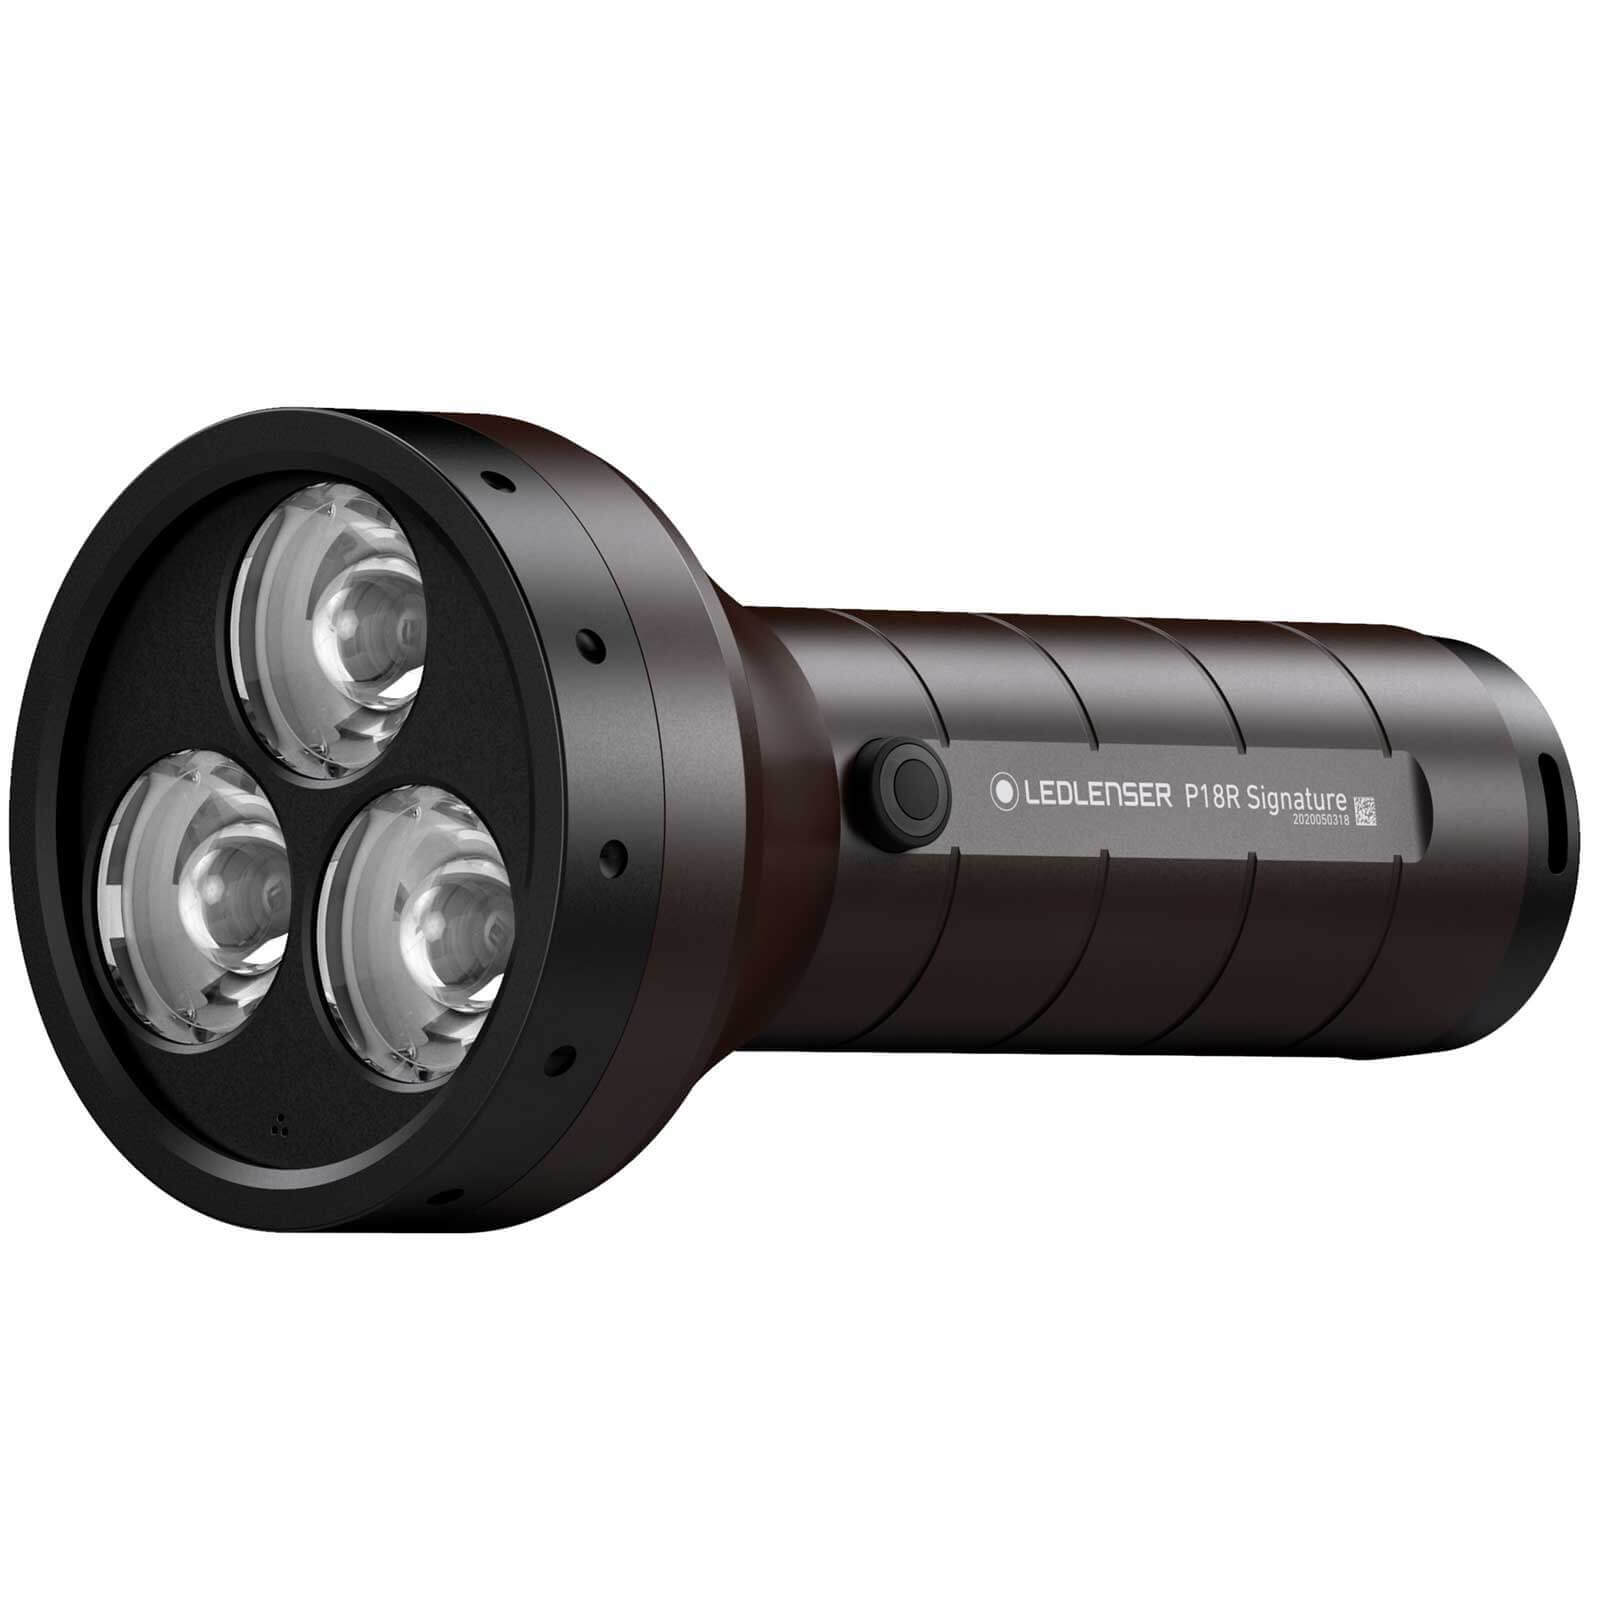 Image of LED Lenser P18R Signature Rechargeable LED Torch Black